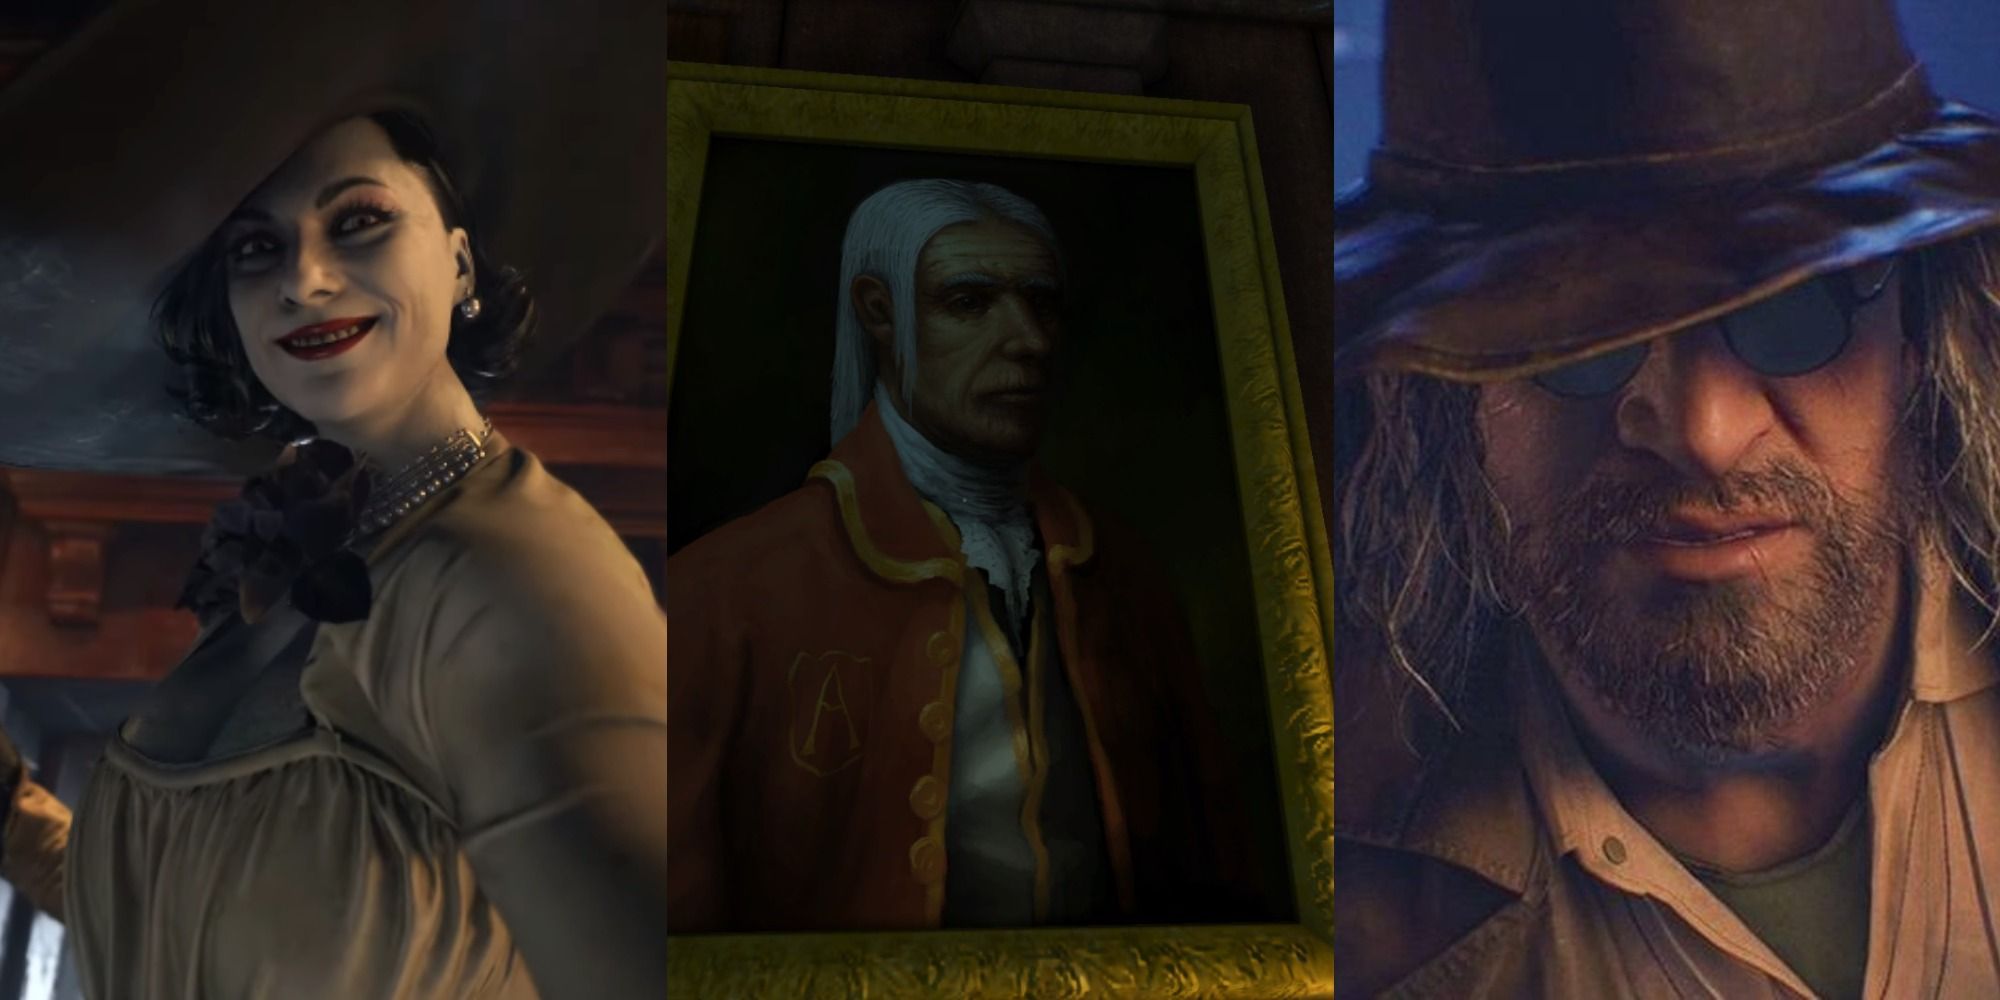 Horror Game Villains Inspired By Real People Split Featured Lady Dimitrescu, Alexander of Brennenburg, and Karl Heisenberg